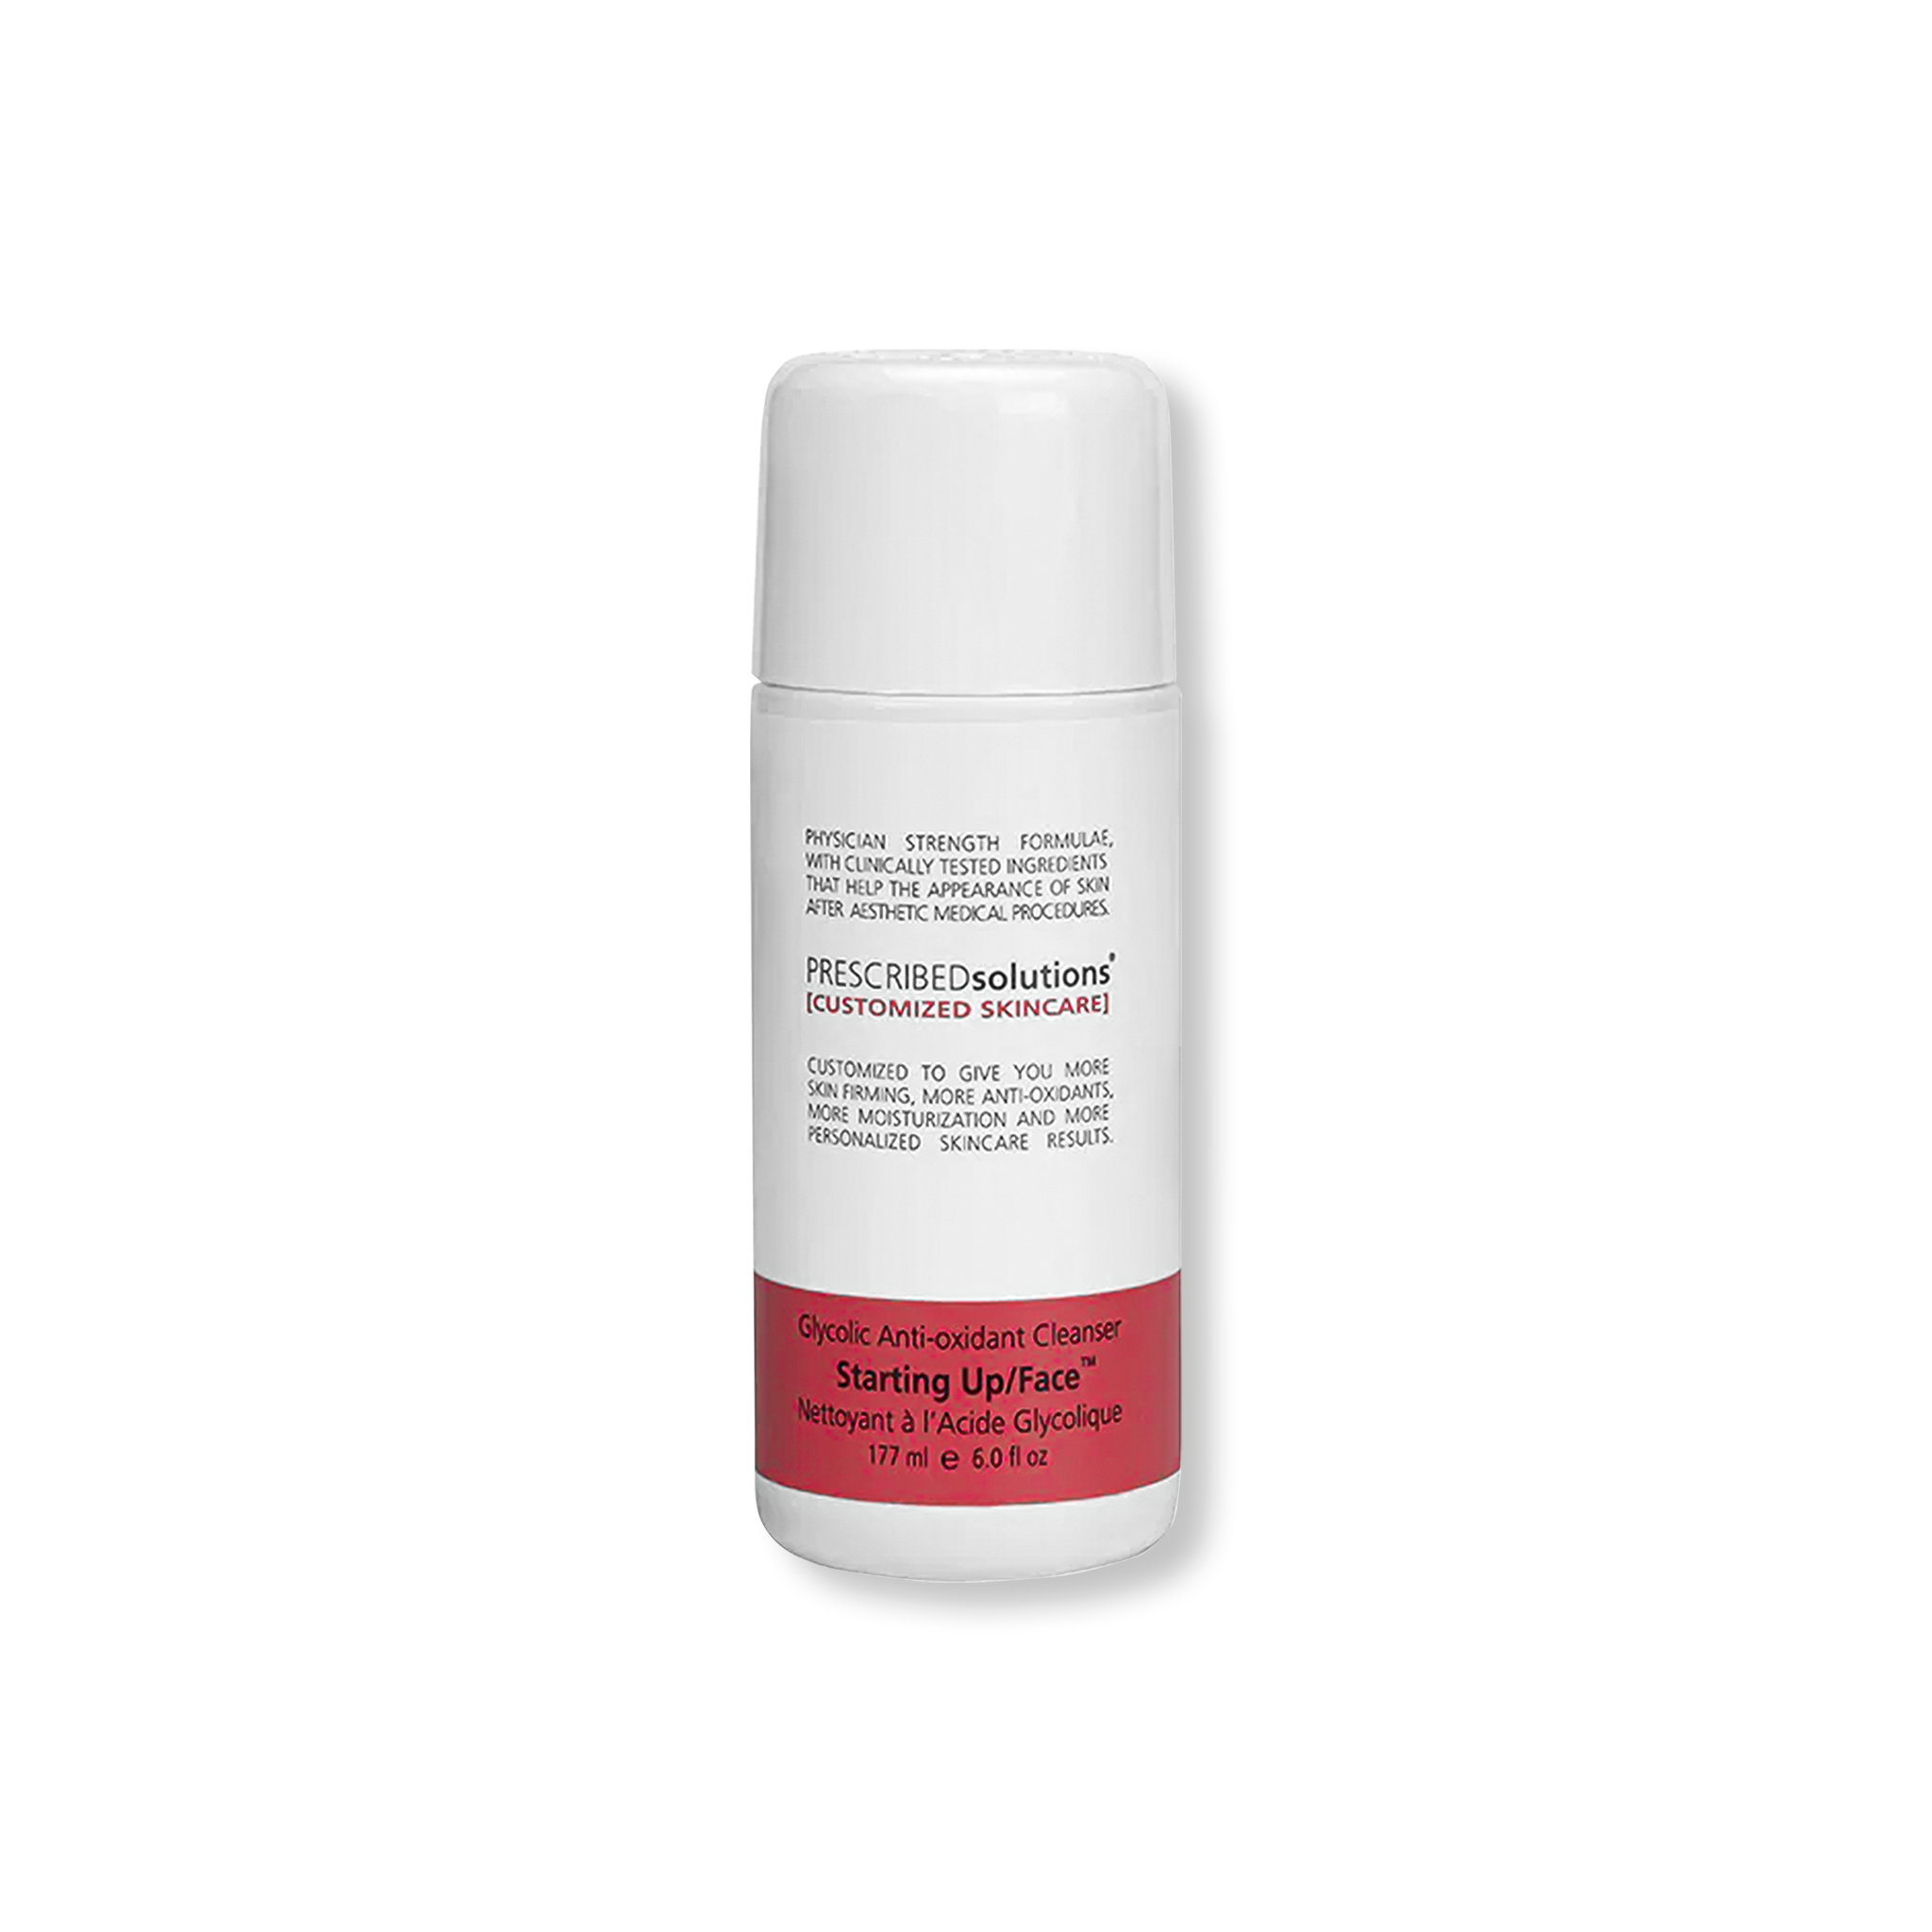 PRESCRIBEDsolutions Starting Up/Face Glycolic Antioxidant Cleanser